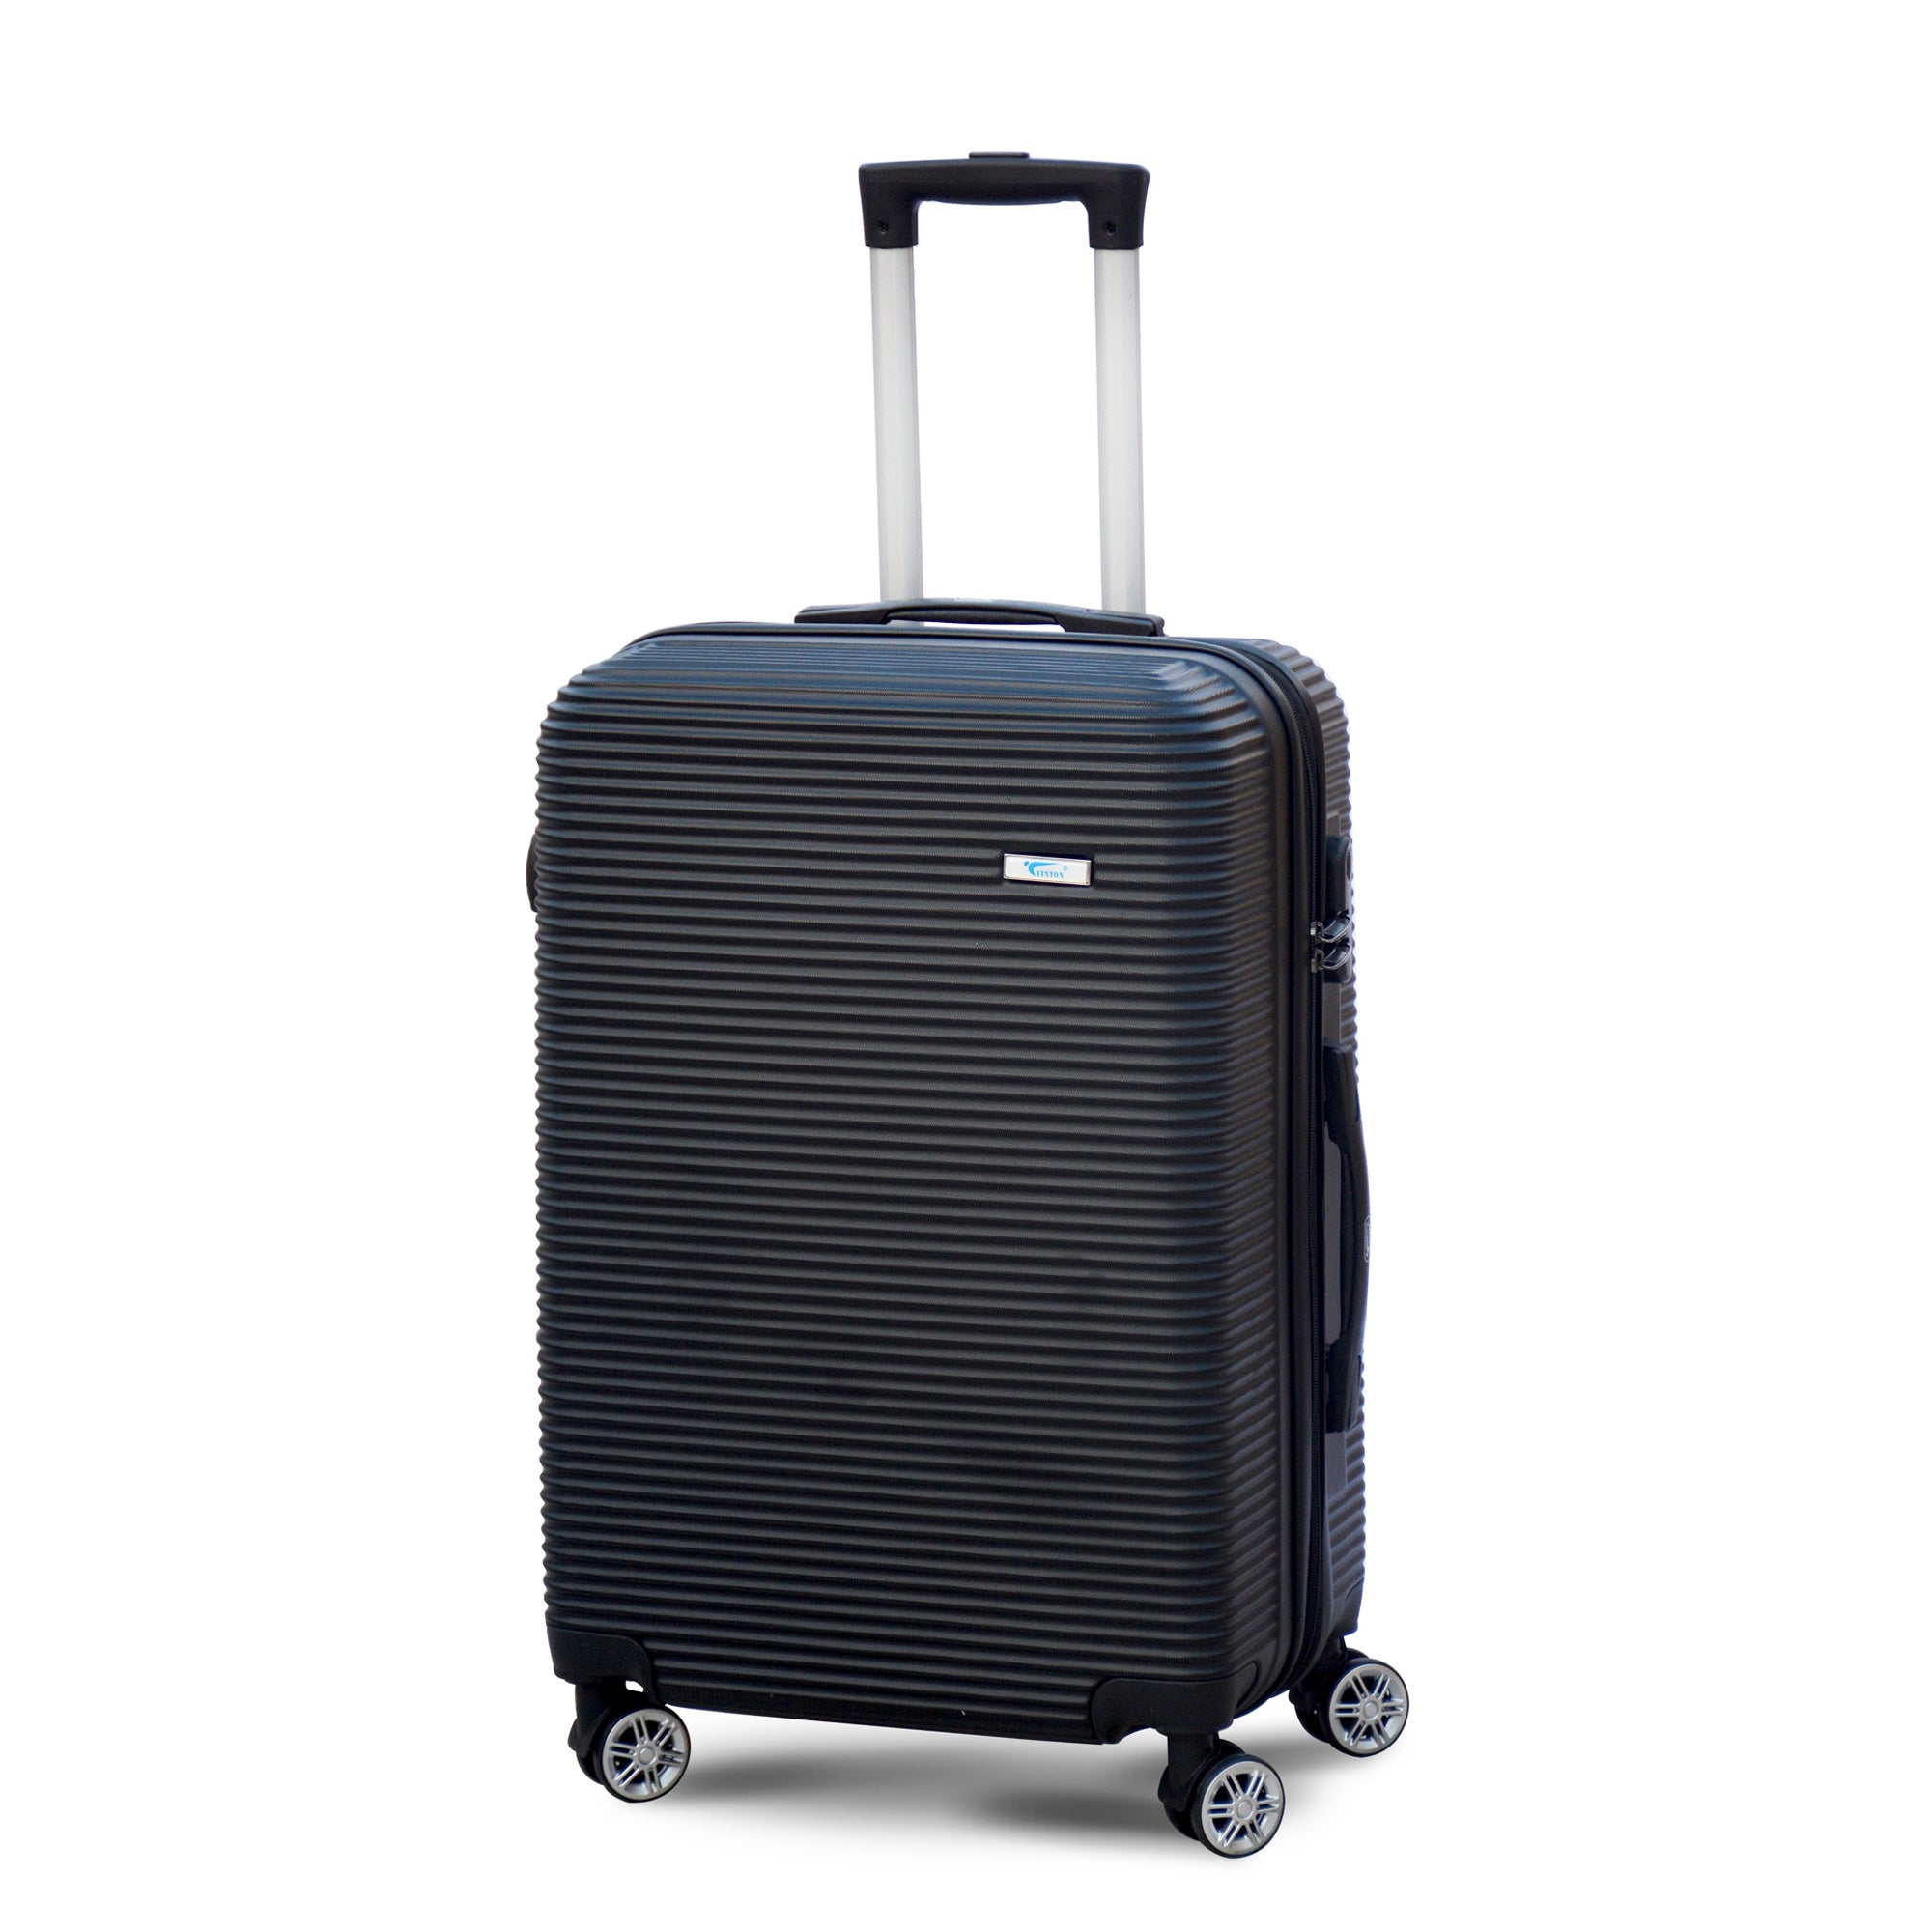 3 Piece Set 20" 24" 28 Inches Black Colour JIAN ABS Line Luggage lightweight Hard Case Trolley Bag With Spinner Wheel